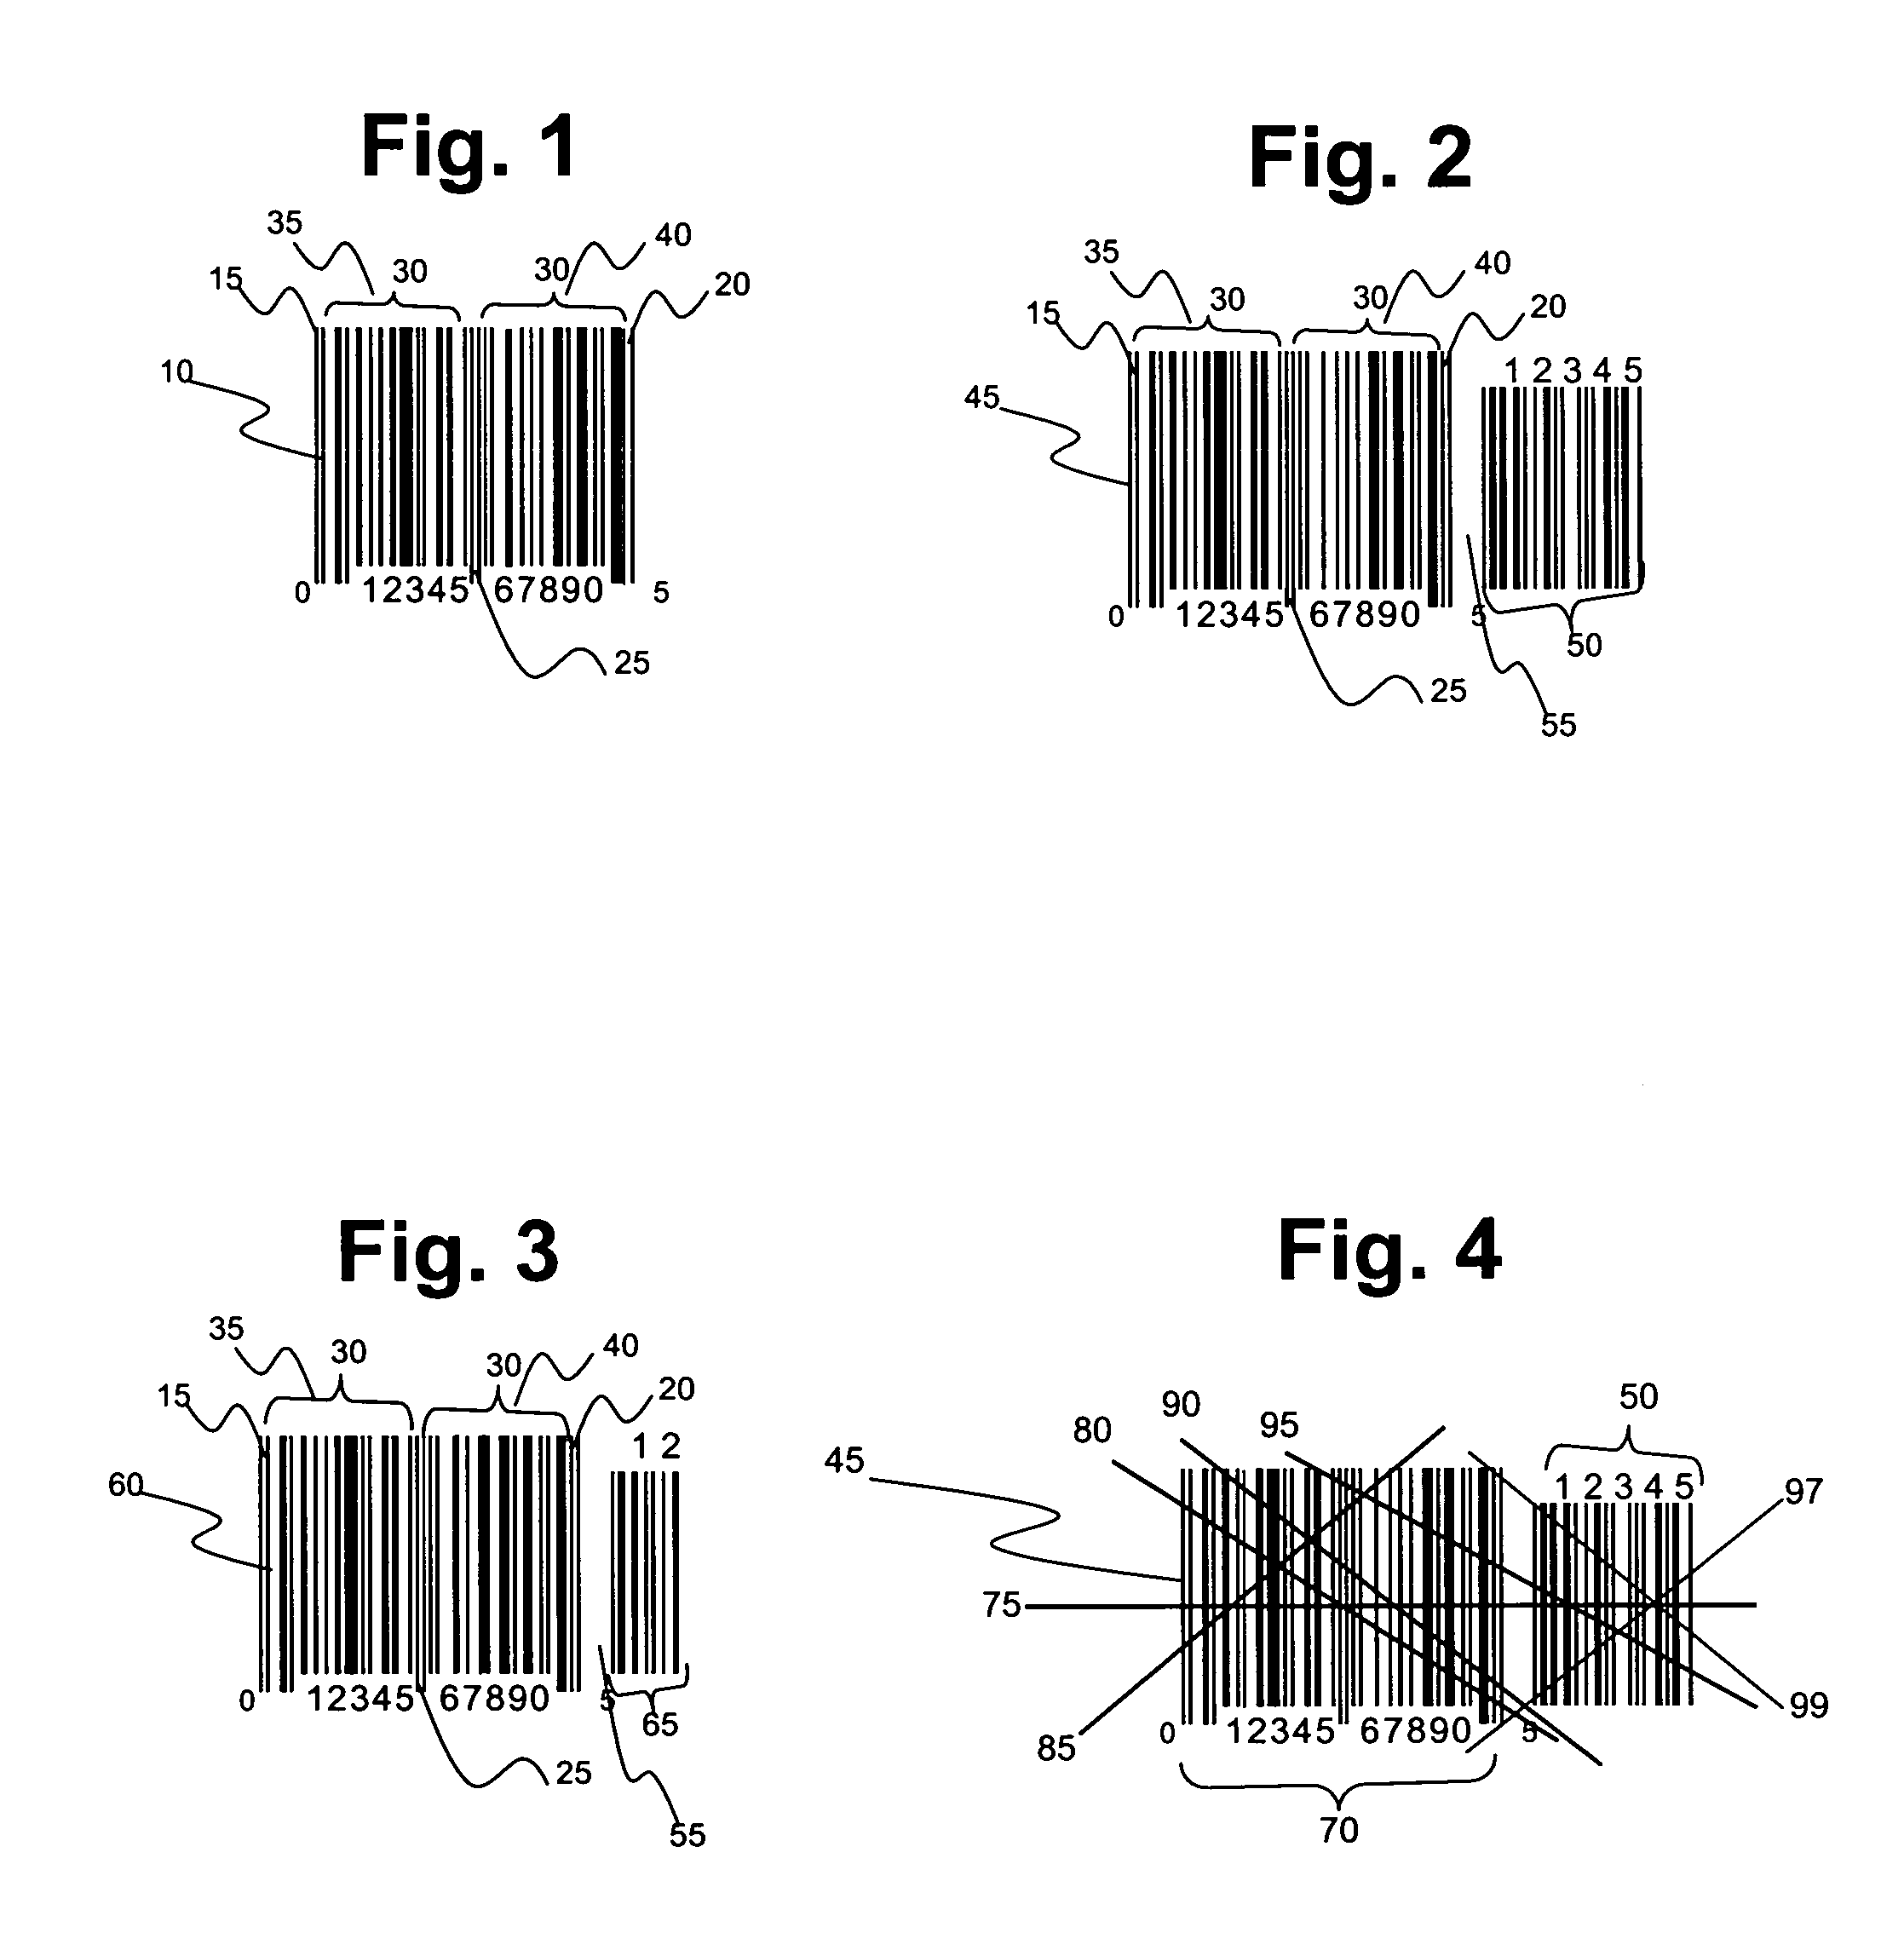 Add-on capture rate in a barcode scanning system